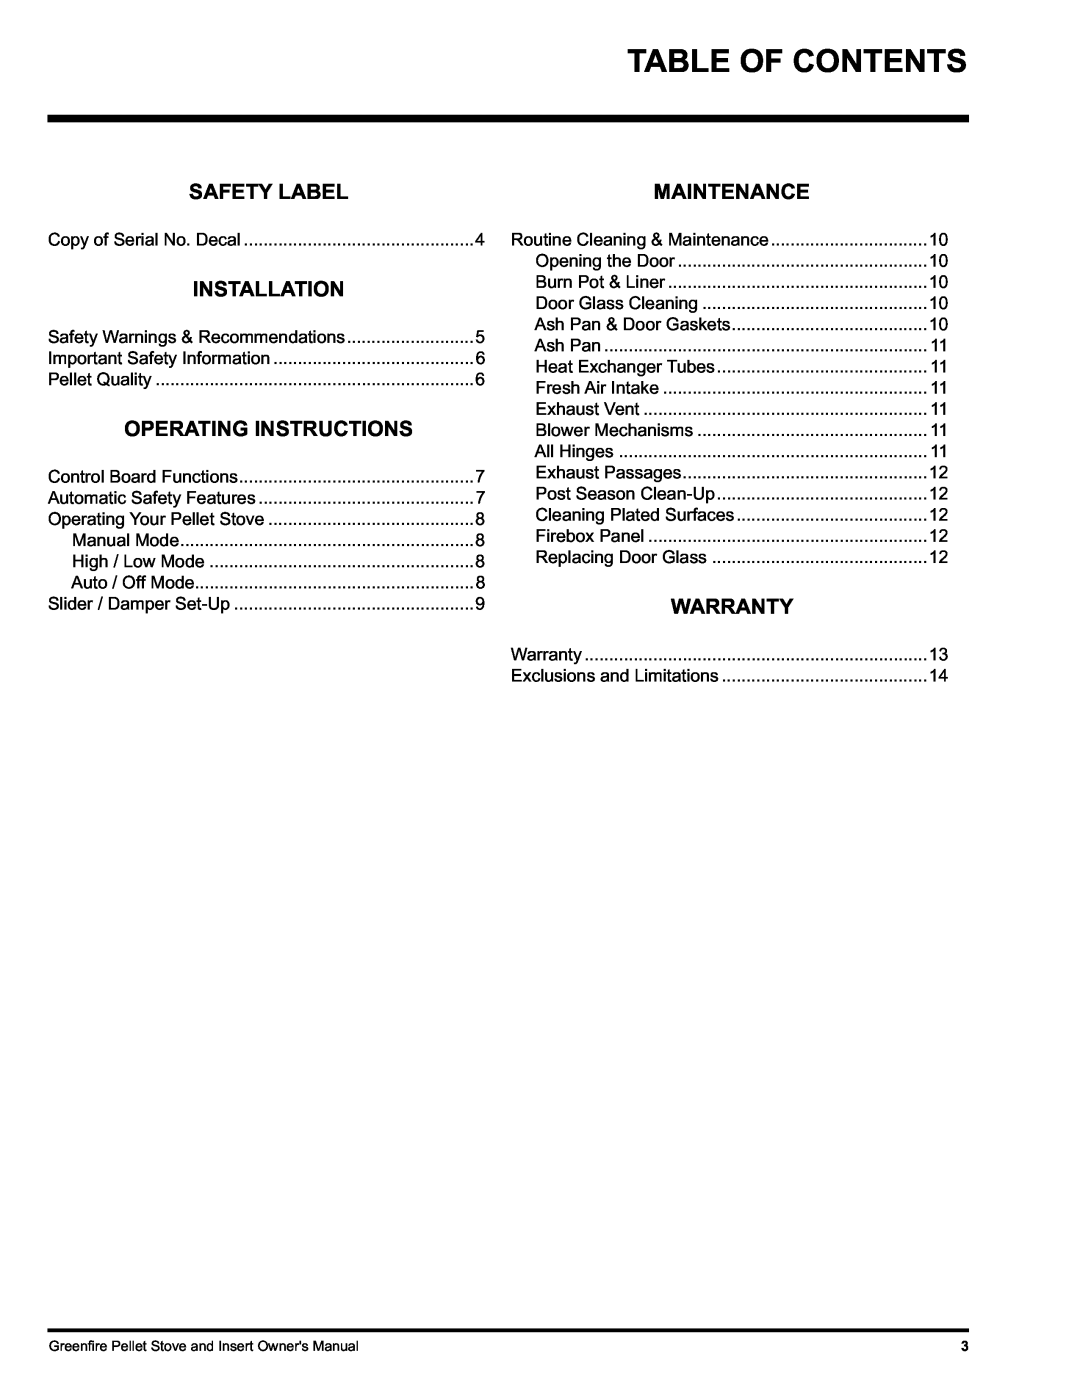 FMI GFI55, GF55 owner manual Table Of Contents, Maintenance, Warranty, Safety Label, Installation, Operating Instructions 